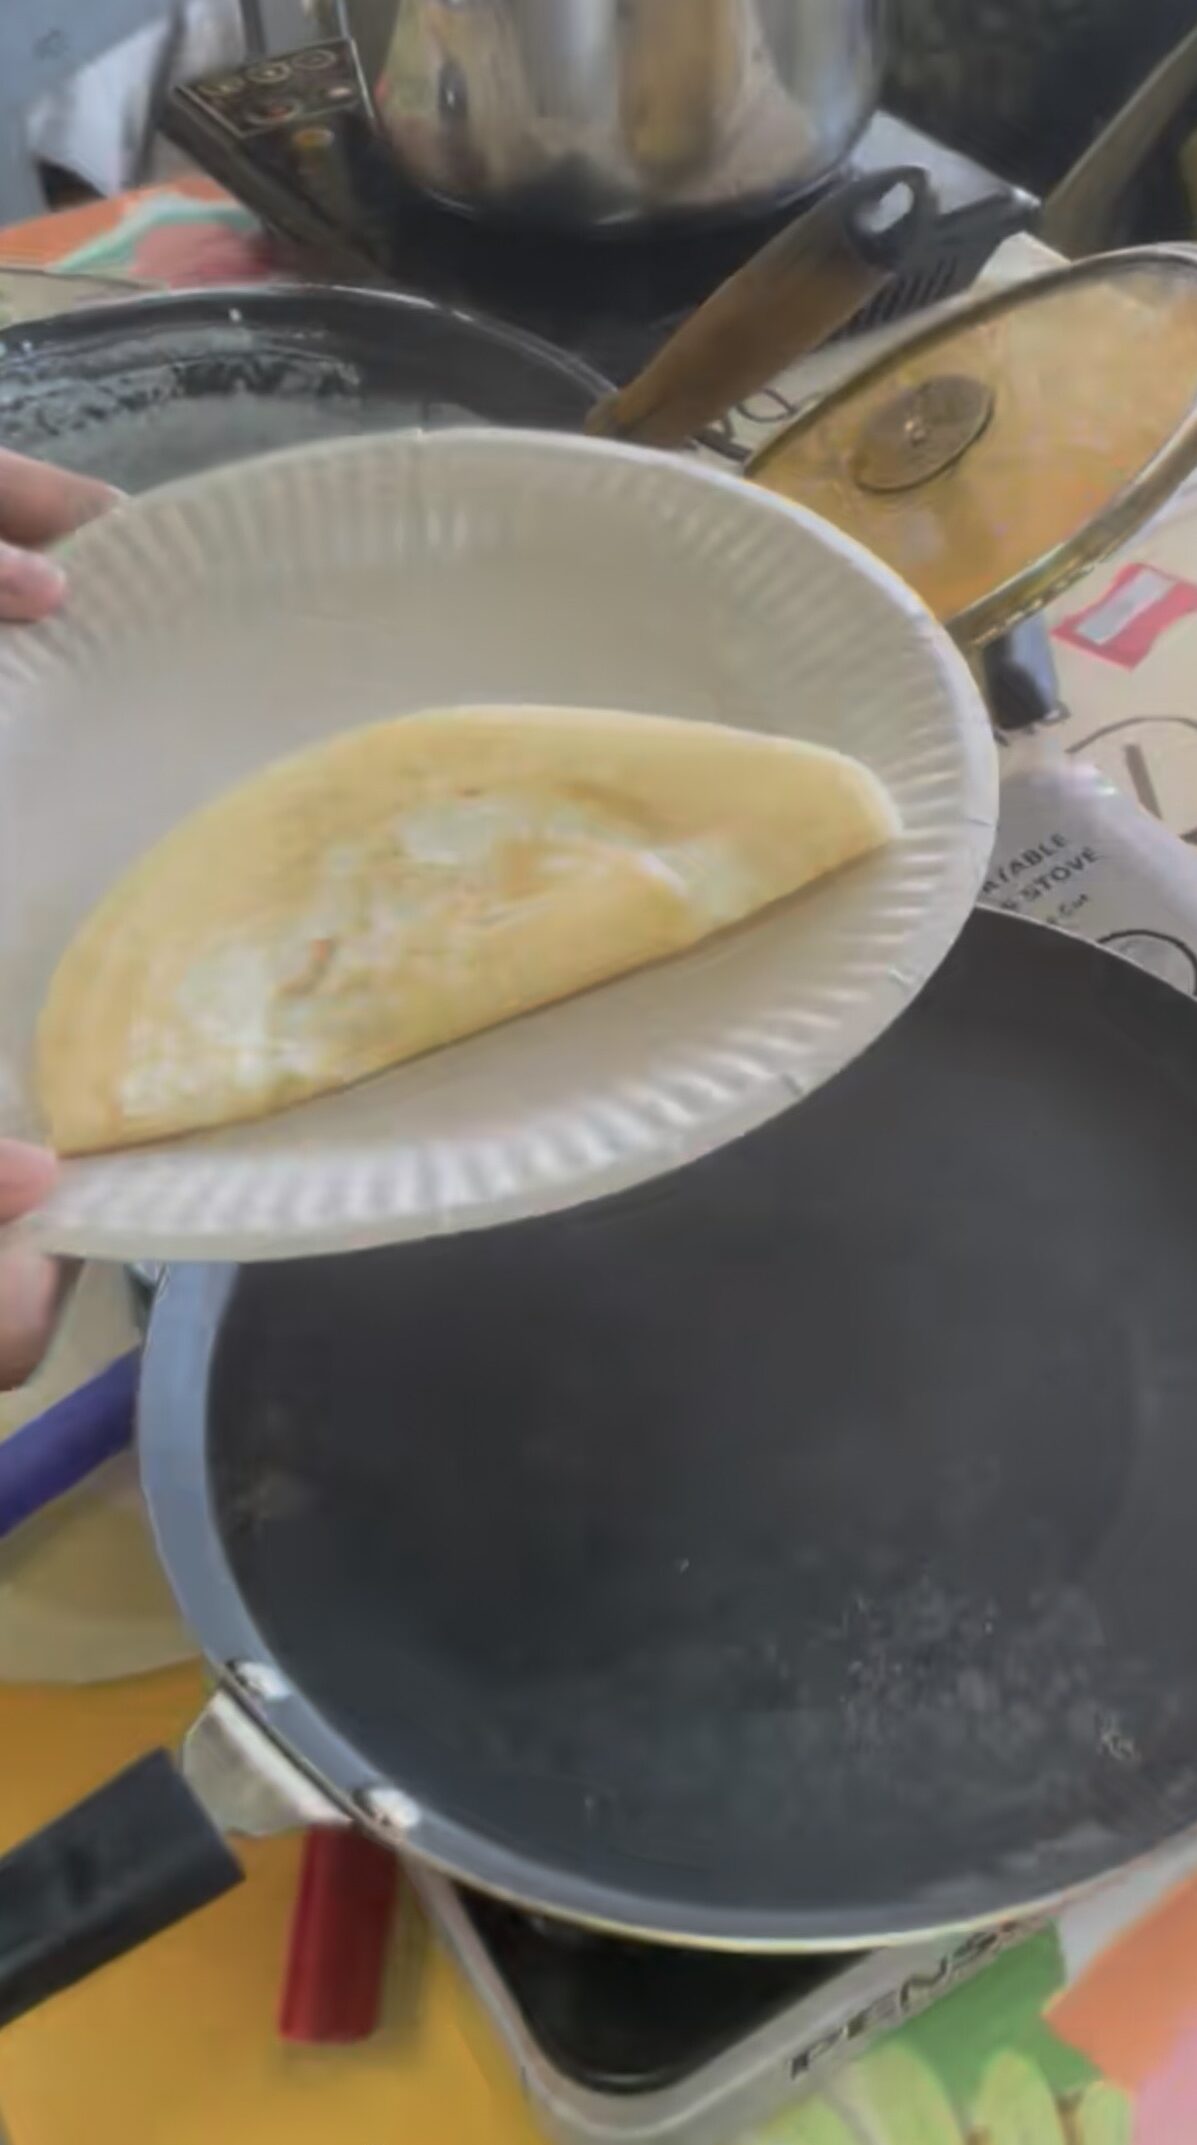 Thosai cooked in classroom